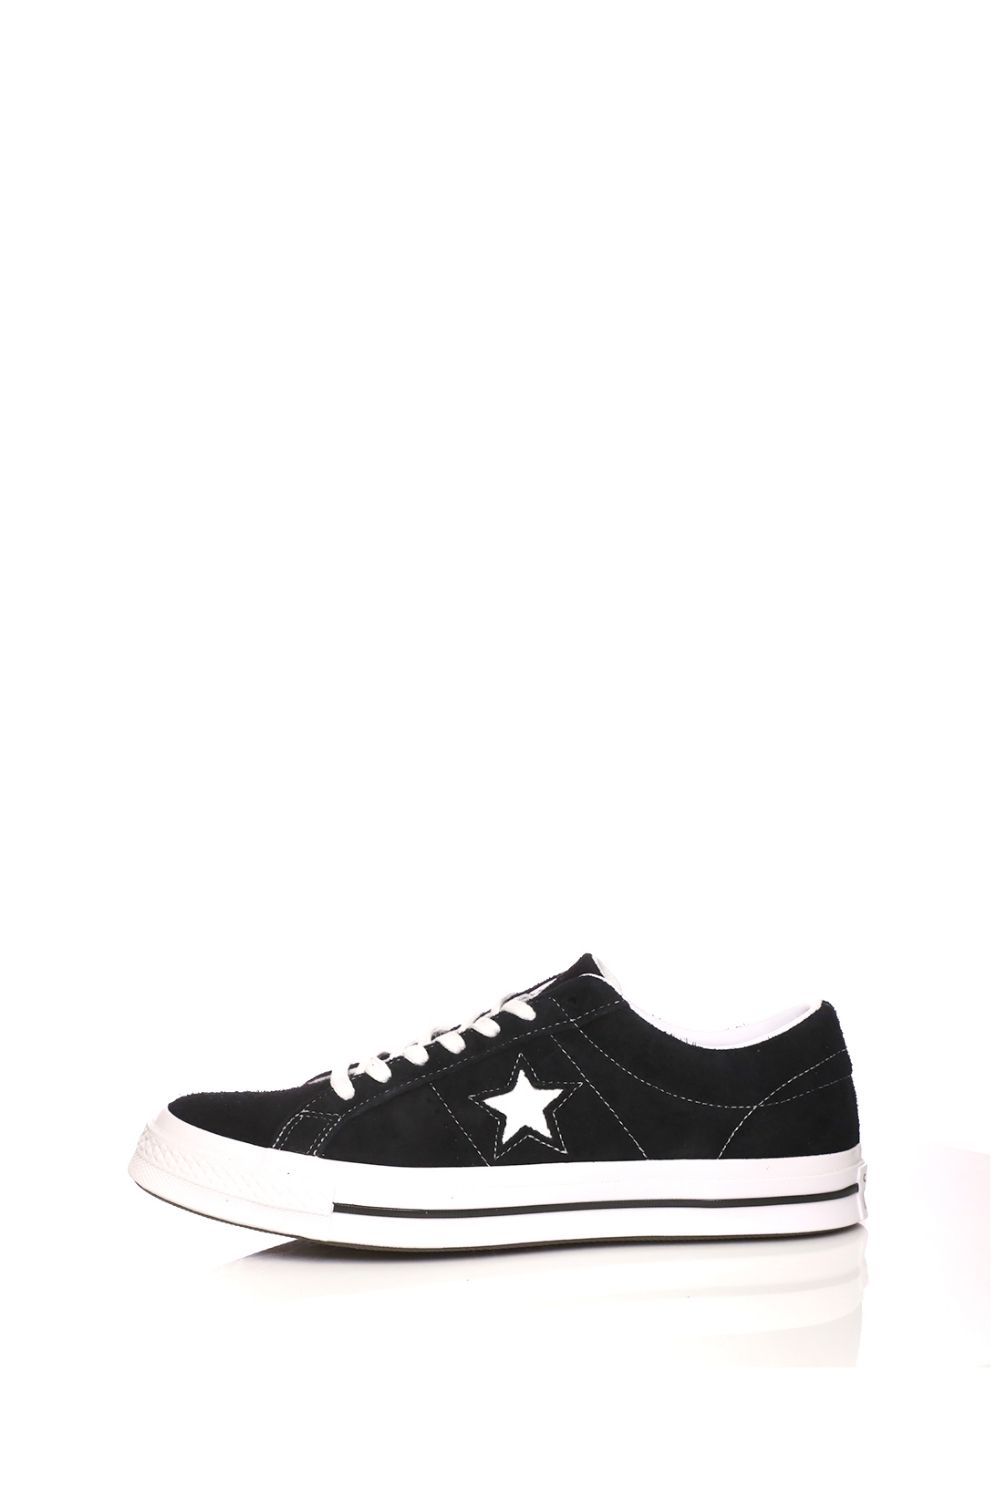 CONVERSE – Unisex sneakers CONVERSE ONE STAR μαύρα